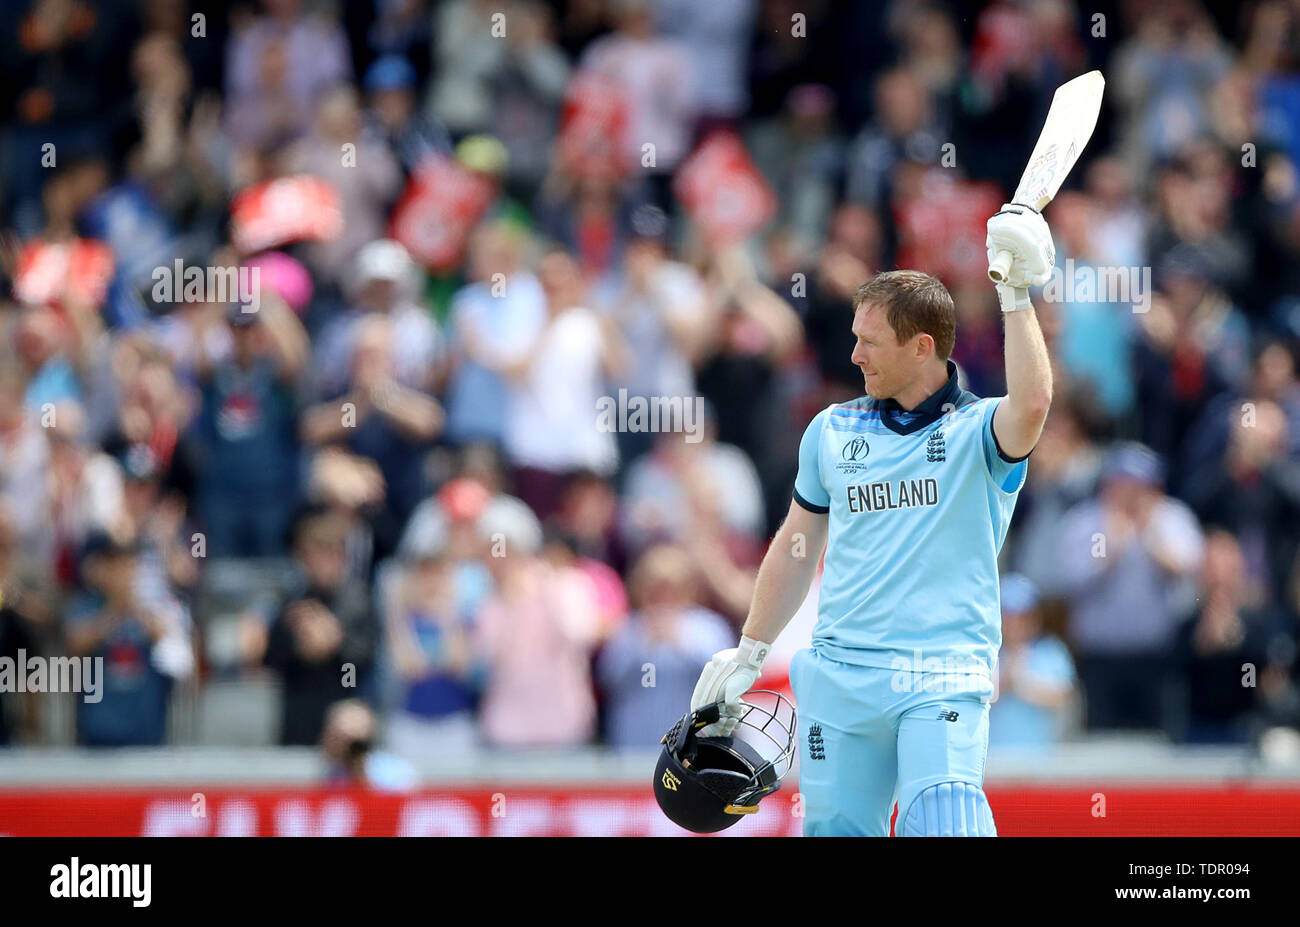 England's Eoin Morgan raises his bat after reaching a century during the ICC cricket World Cup group stage match at Old Trafford, Manchester. Stock Photo